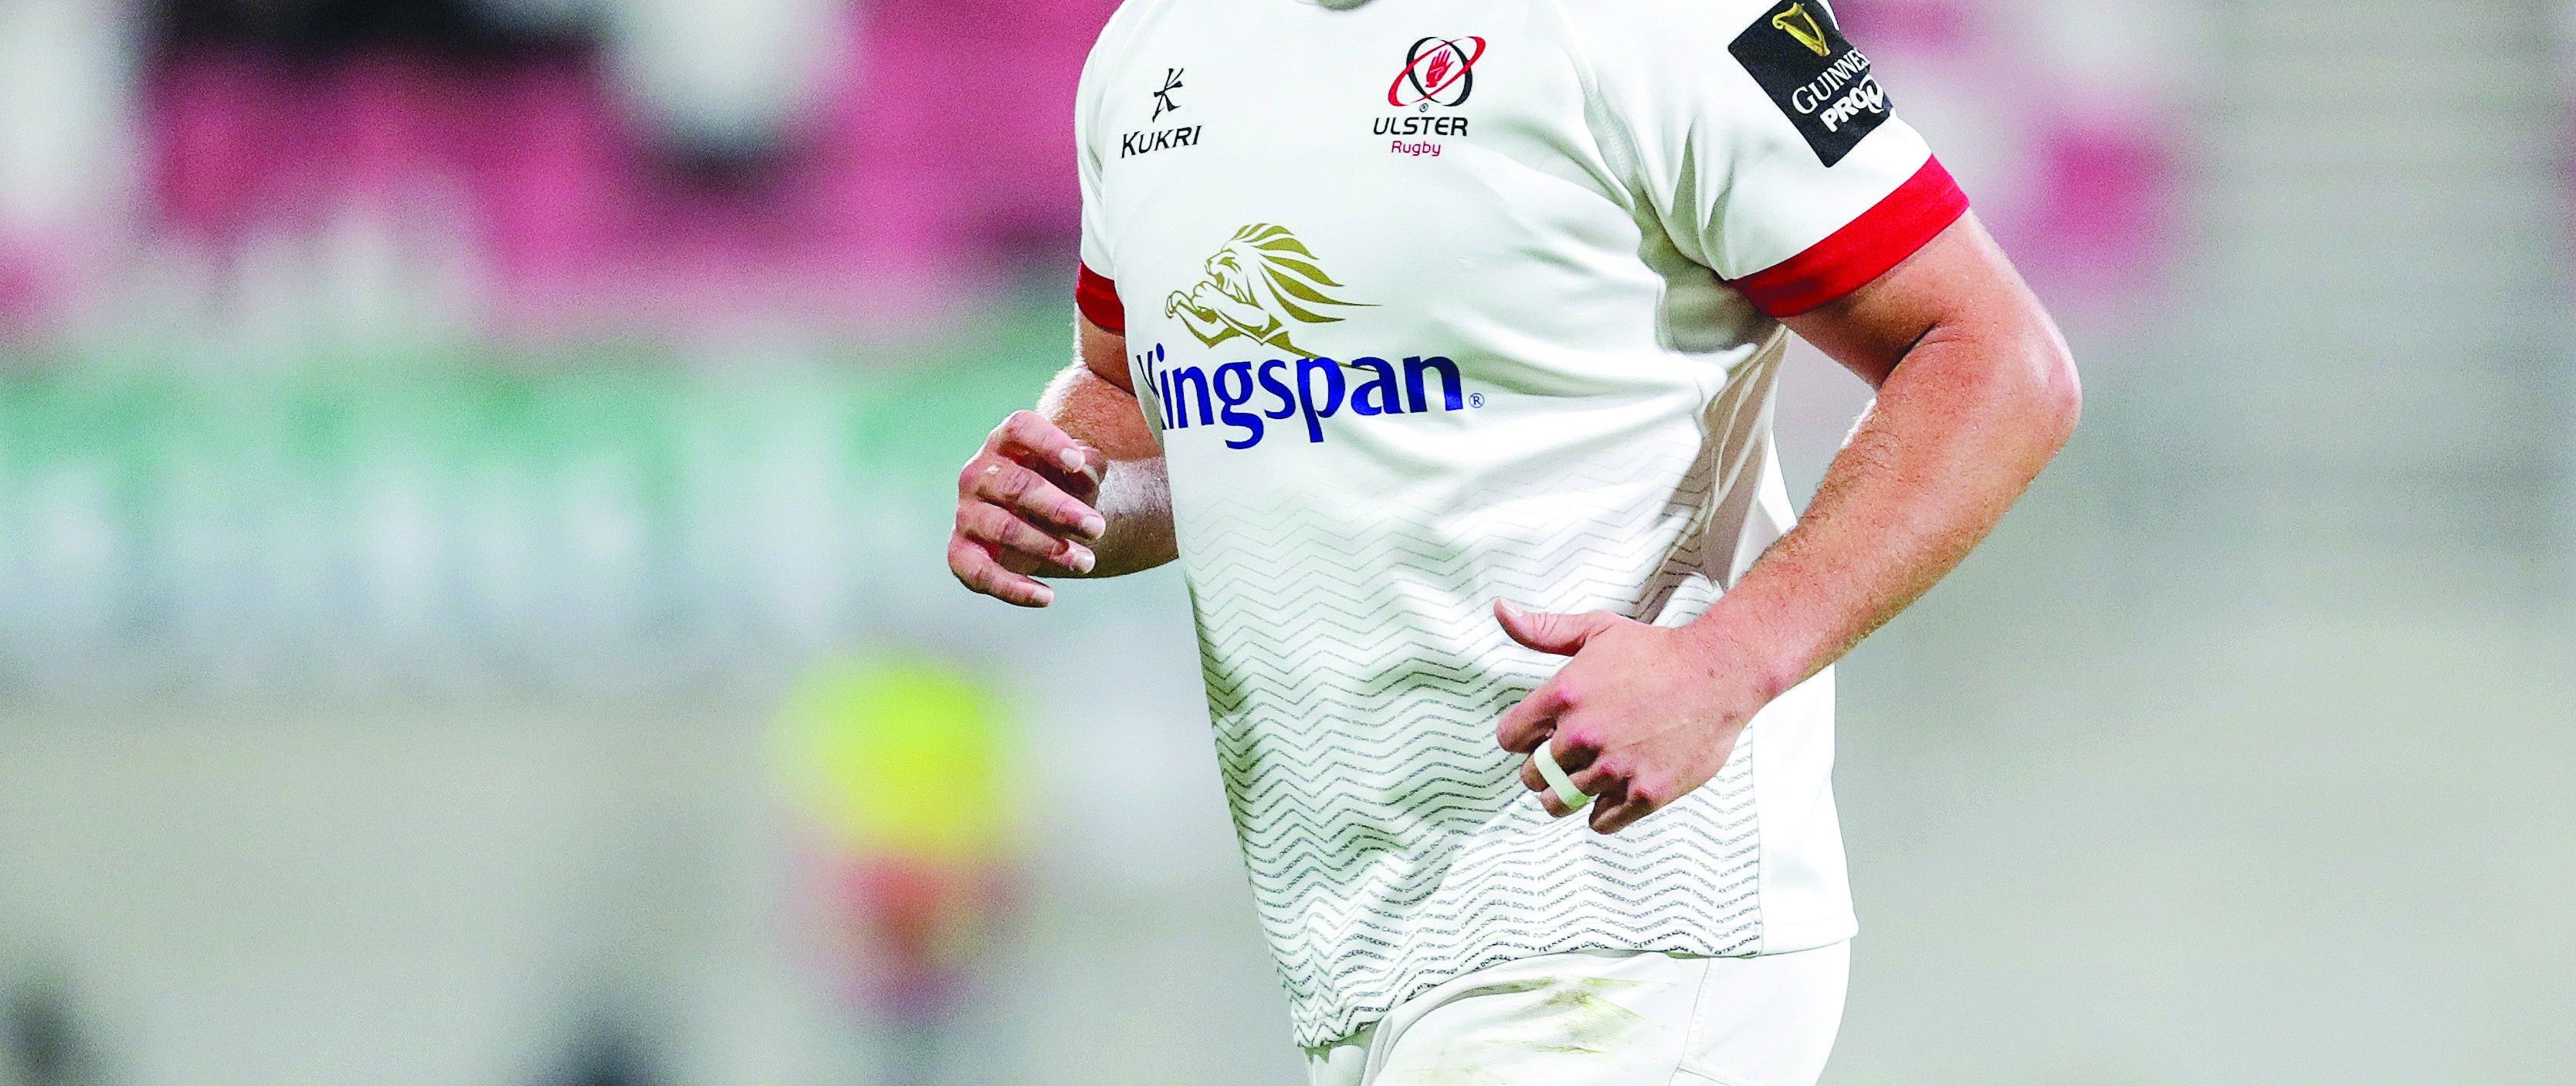 CONTROVERSY: Ulster rugby’s decision to extend Kingspan as sponsors has been condemned by Grenfell relatives and survivors